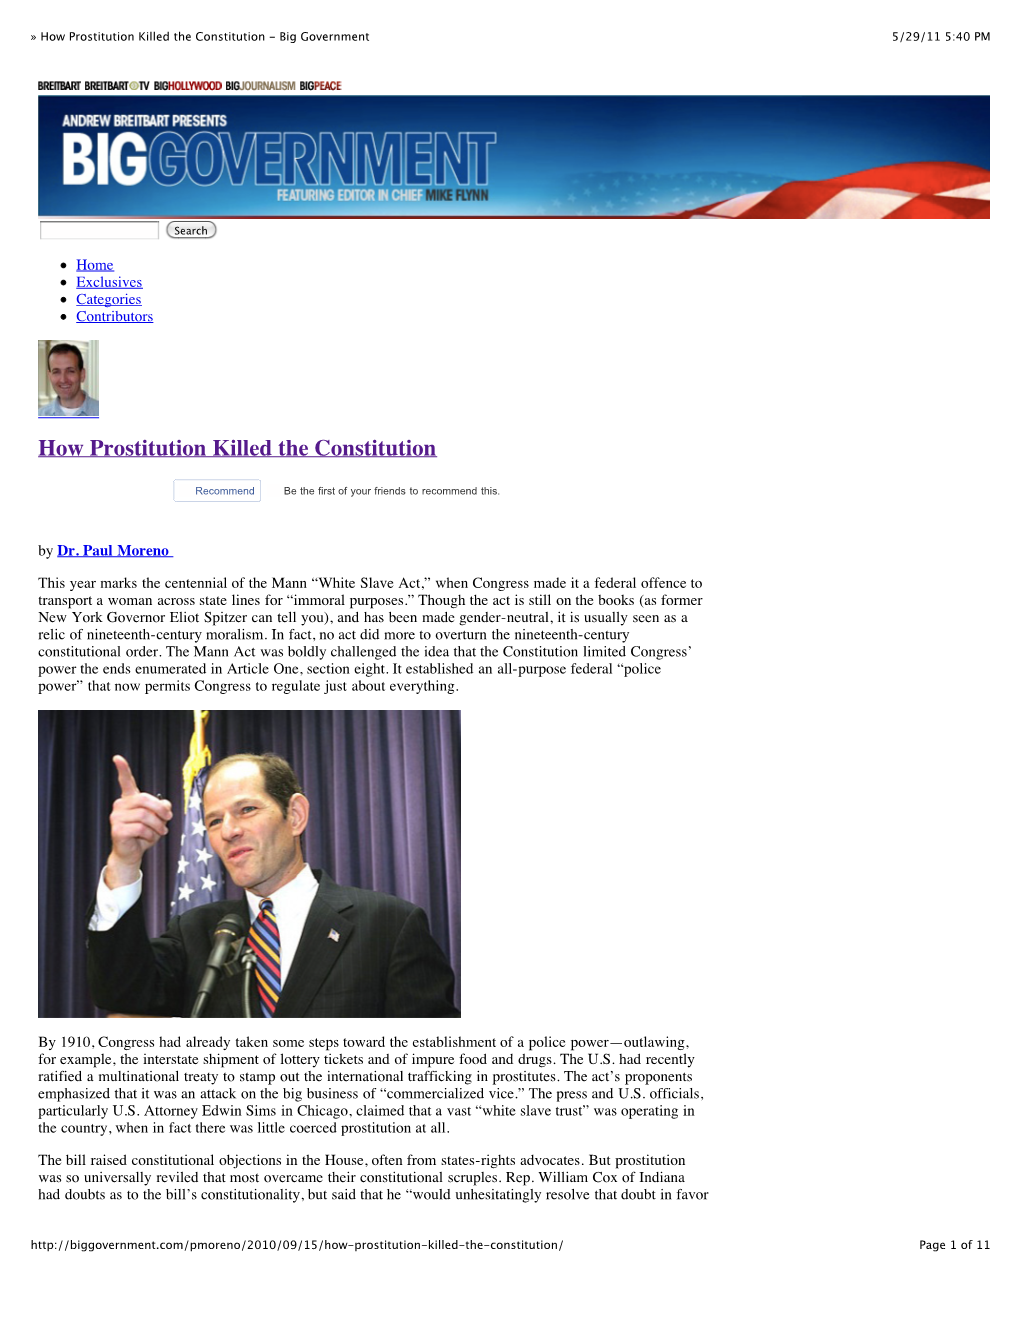 How Prostitution Killed the Constitution - Big Government 5/29/11 5:40 PM